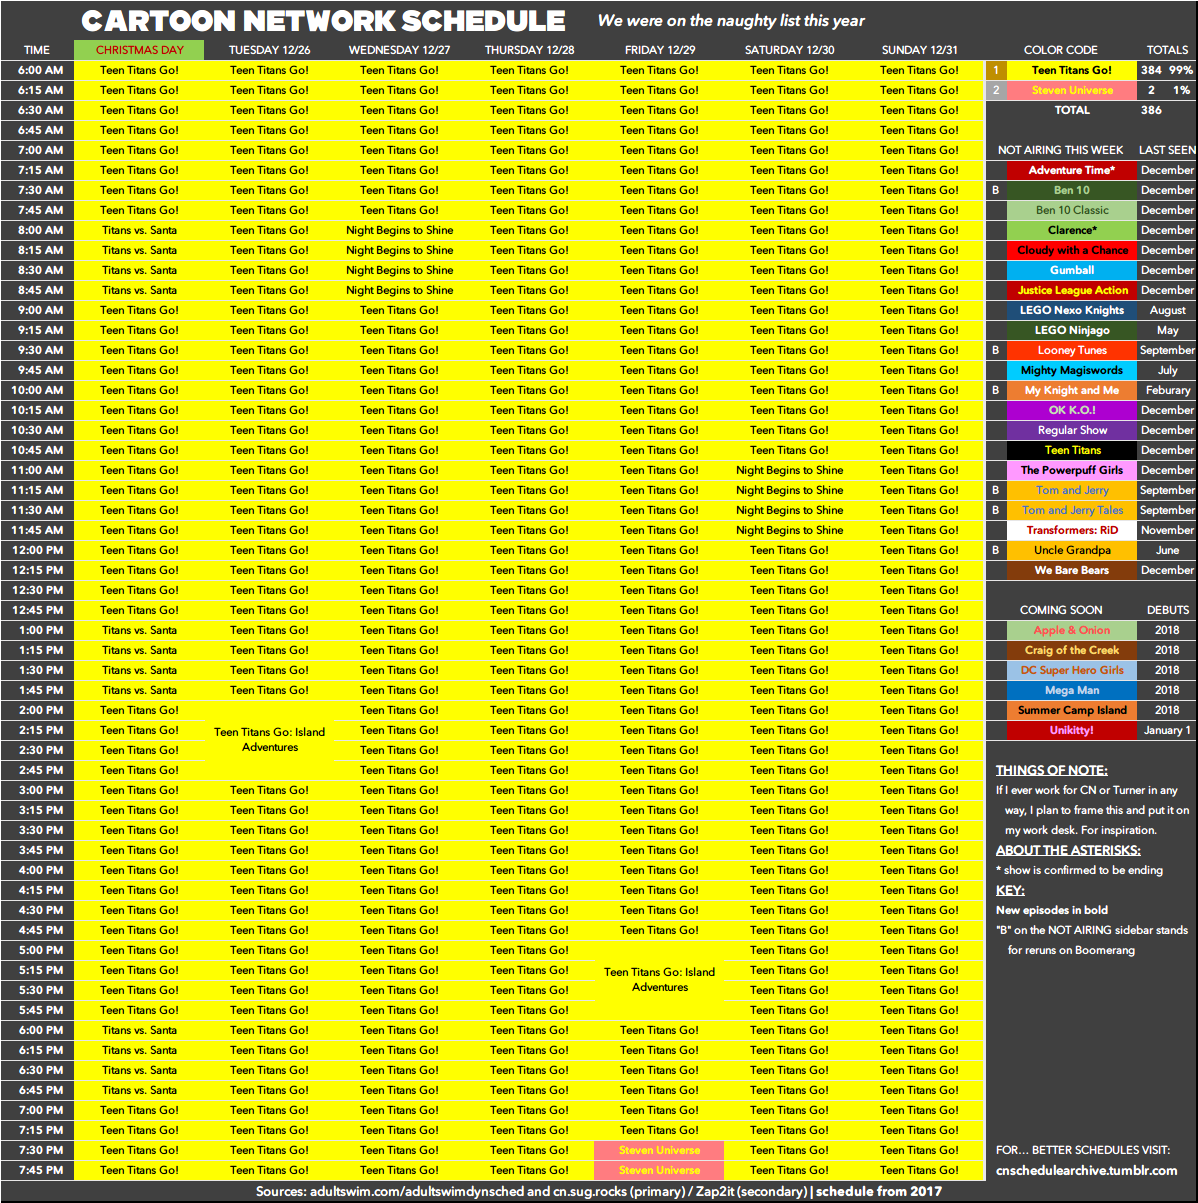 Cartoon Network schedule archive — As much as I'd like to claim this is a  practical...